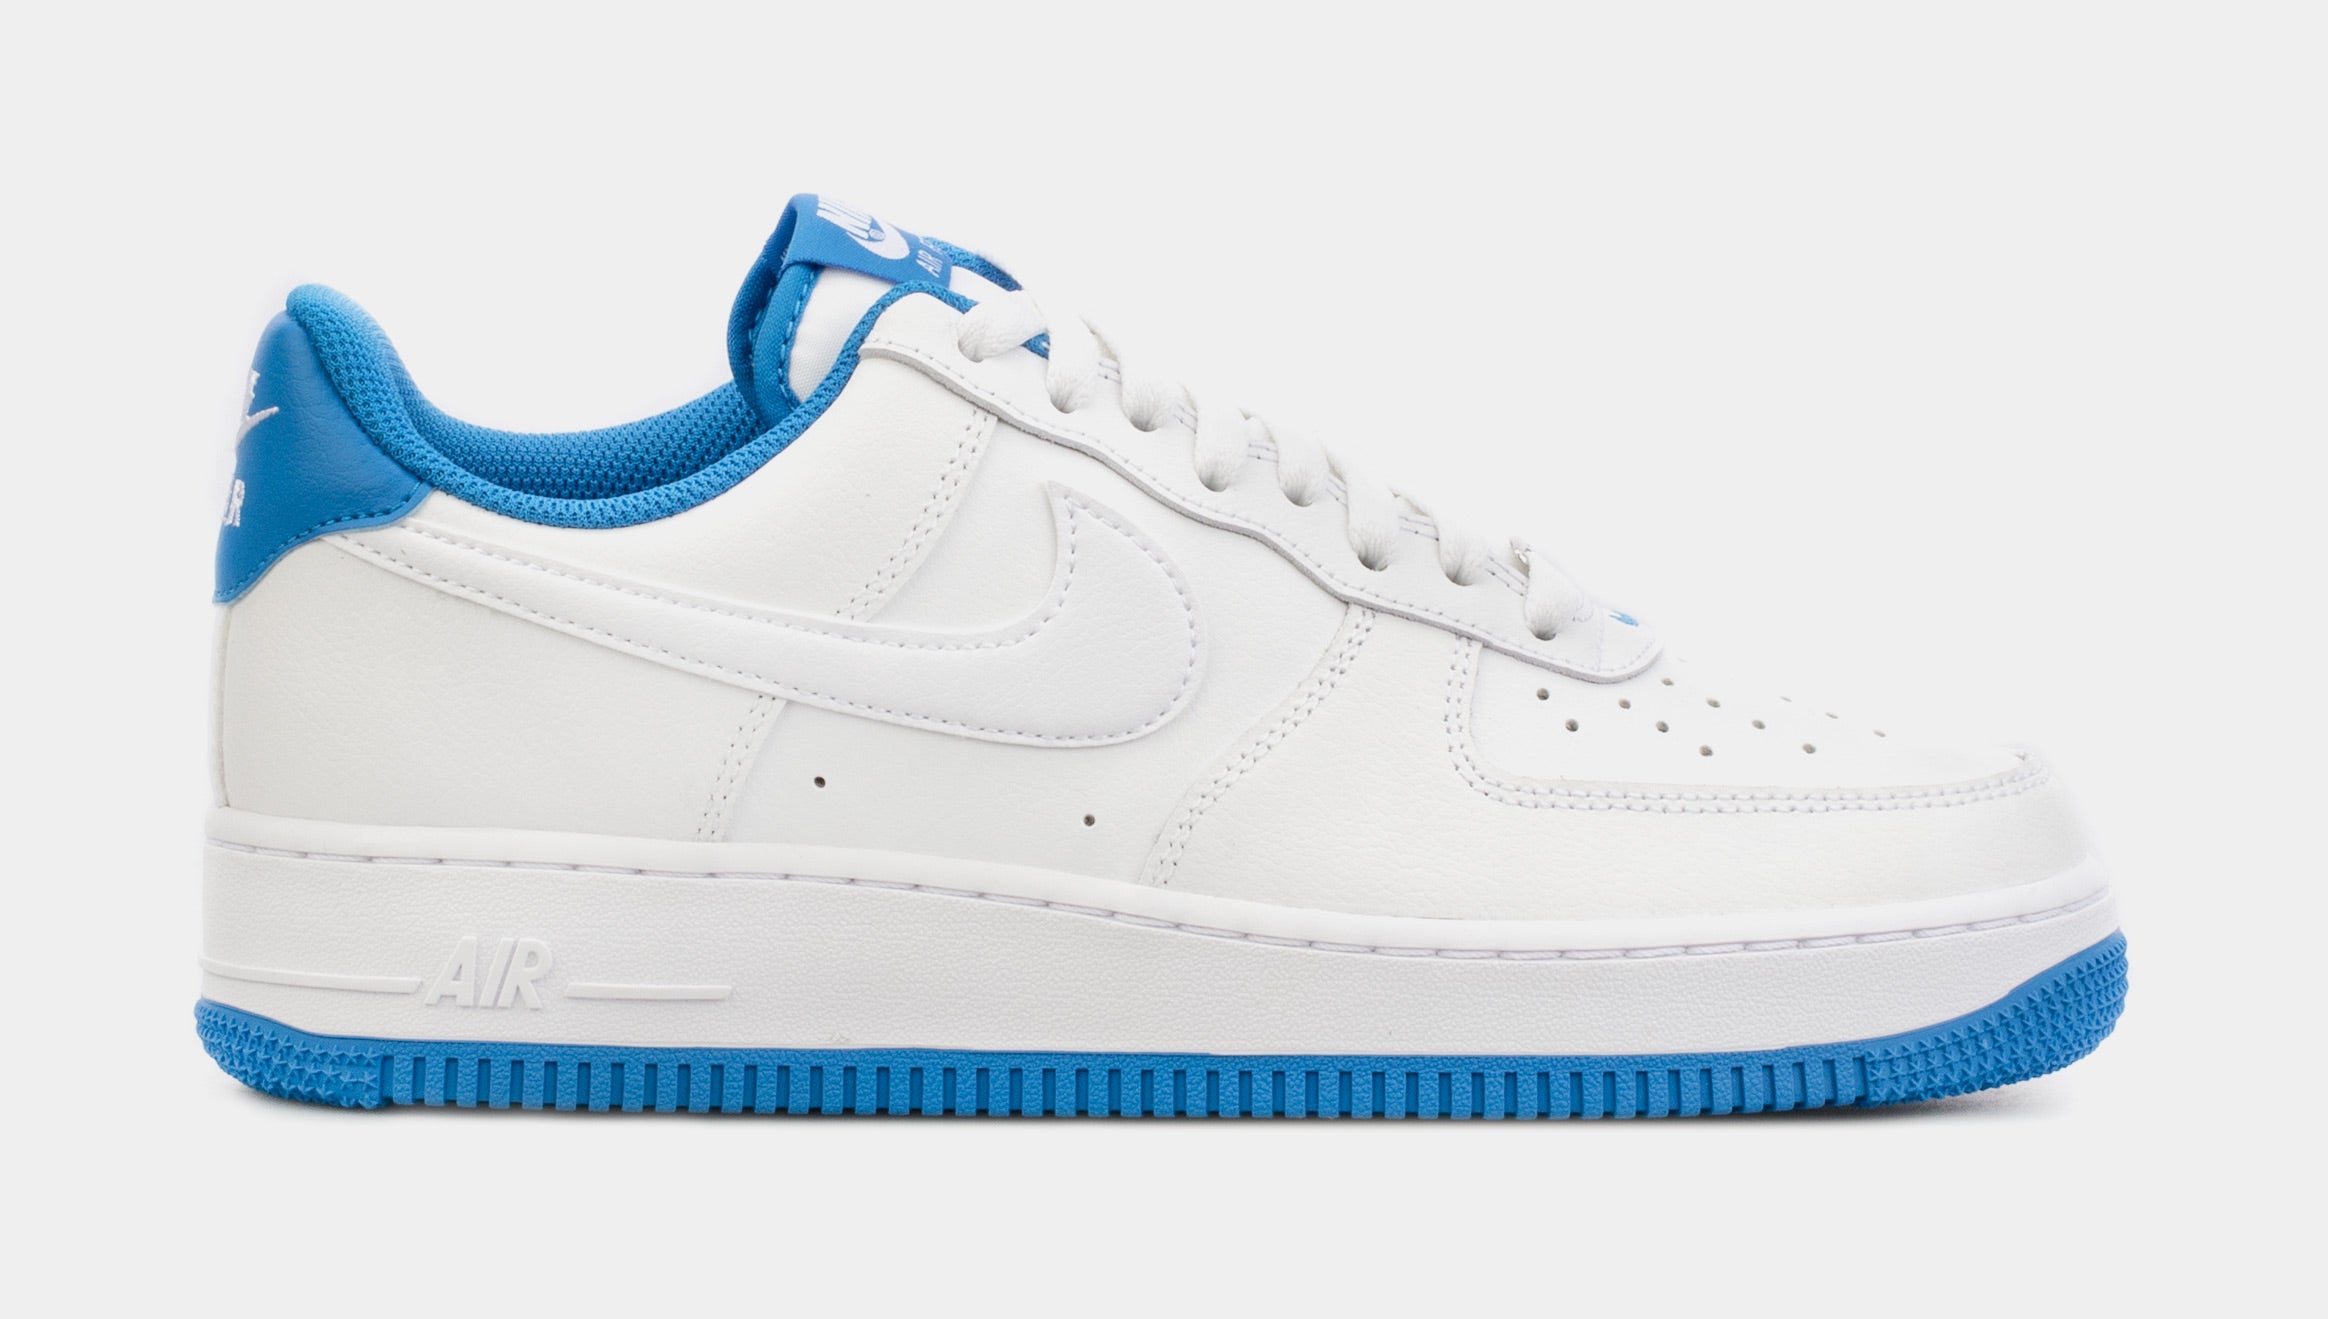 Nike Air Force 1 Low Pronto Blue Lifestyle Shoes White Blue DR9867-101